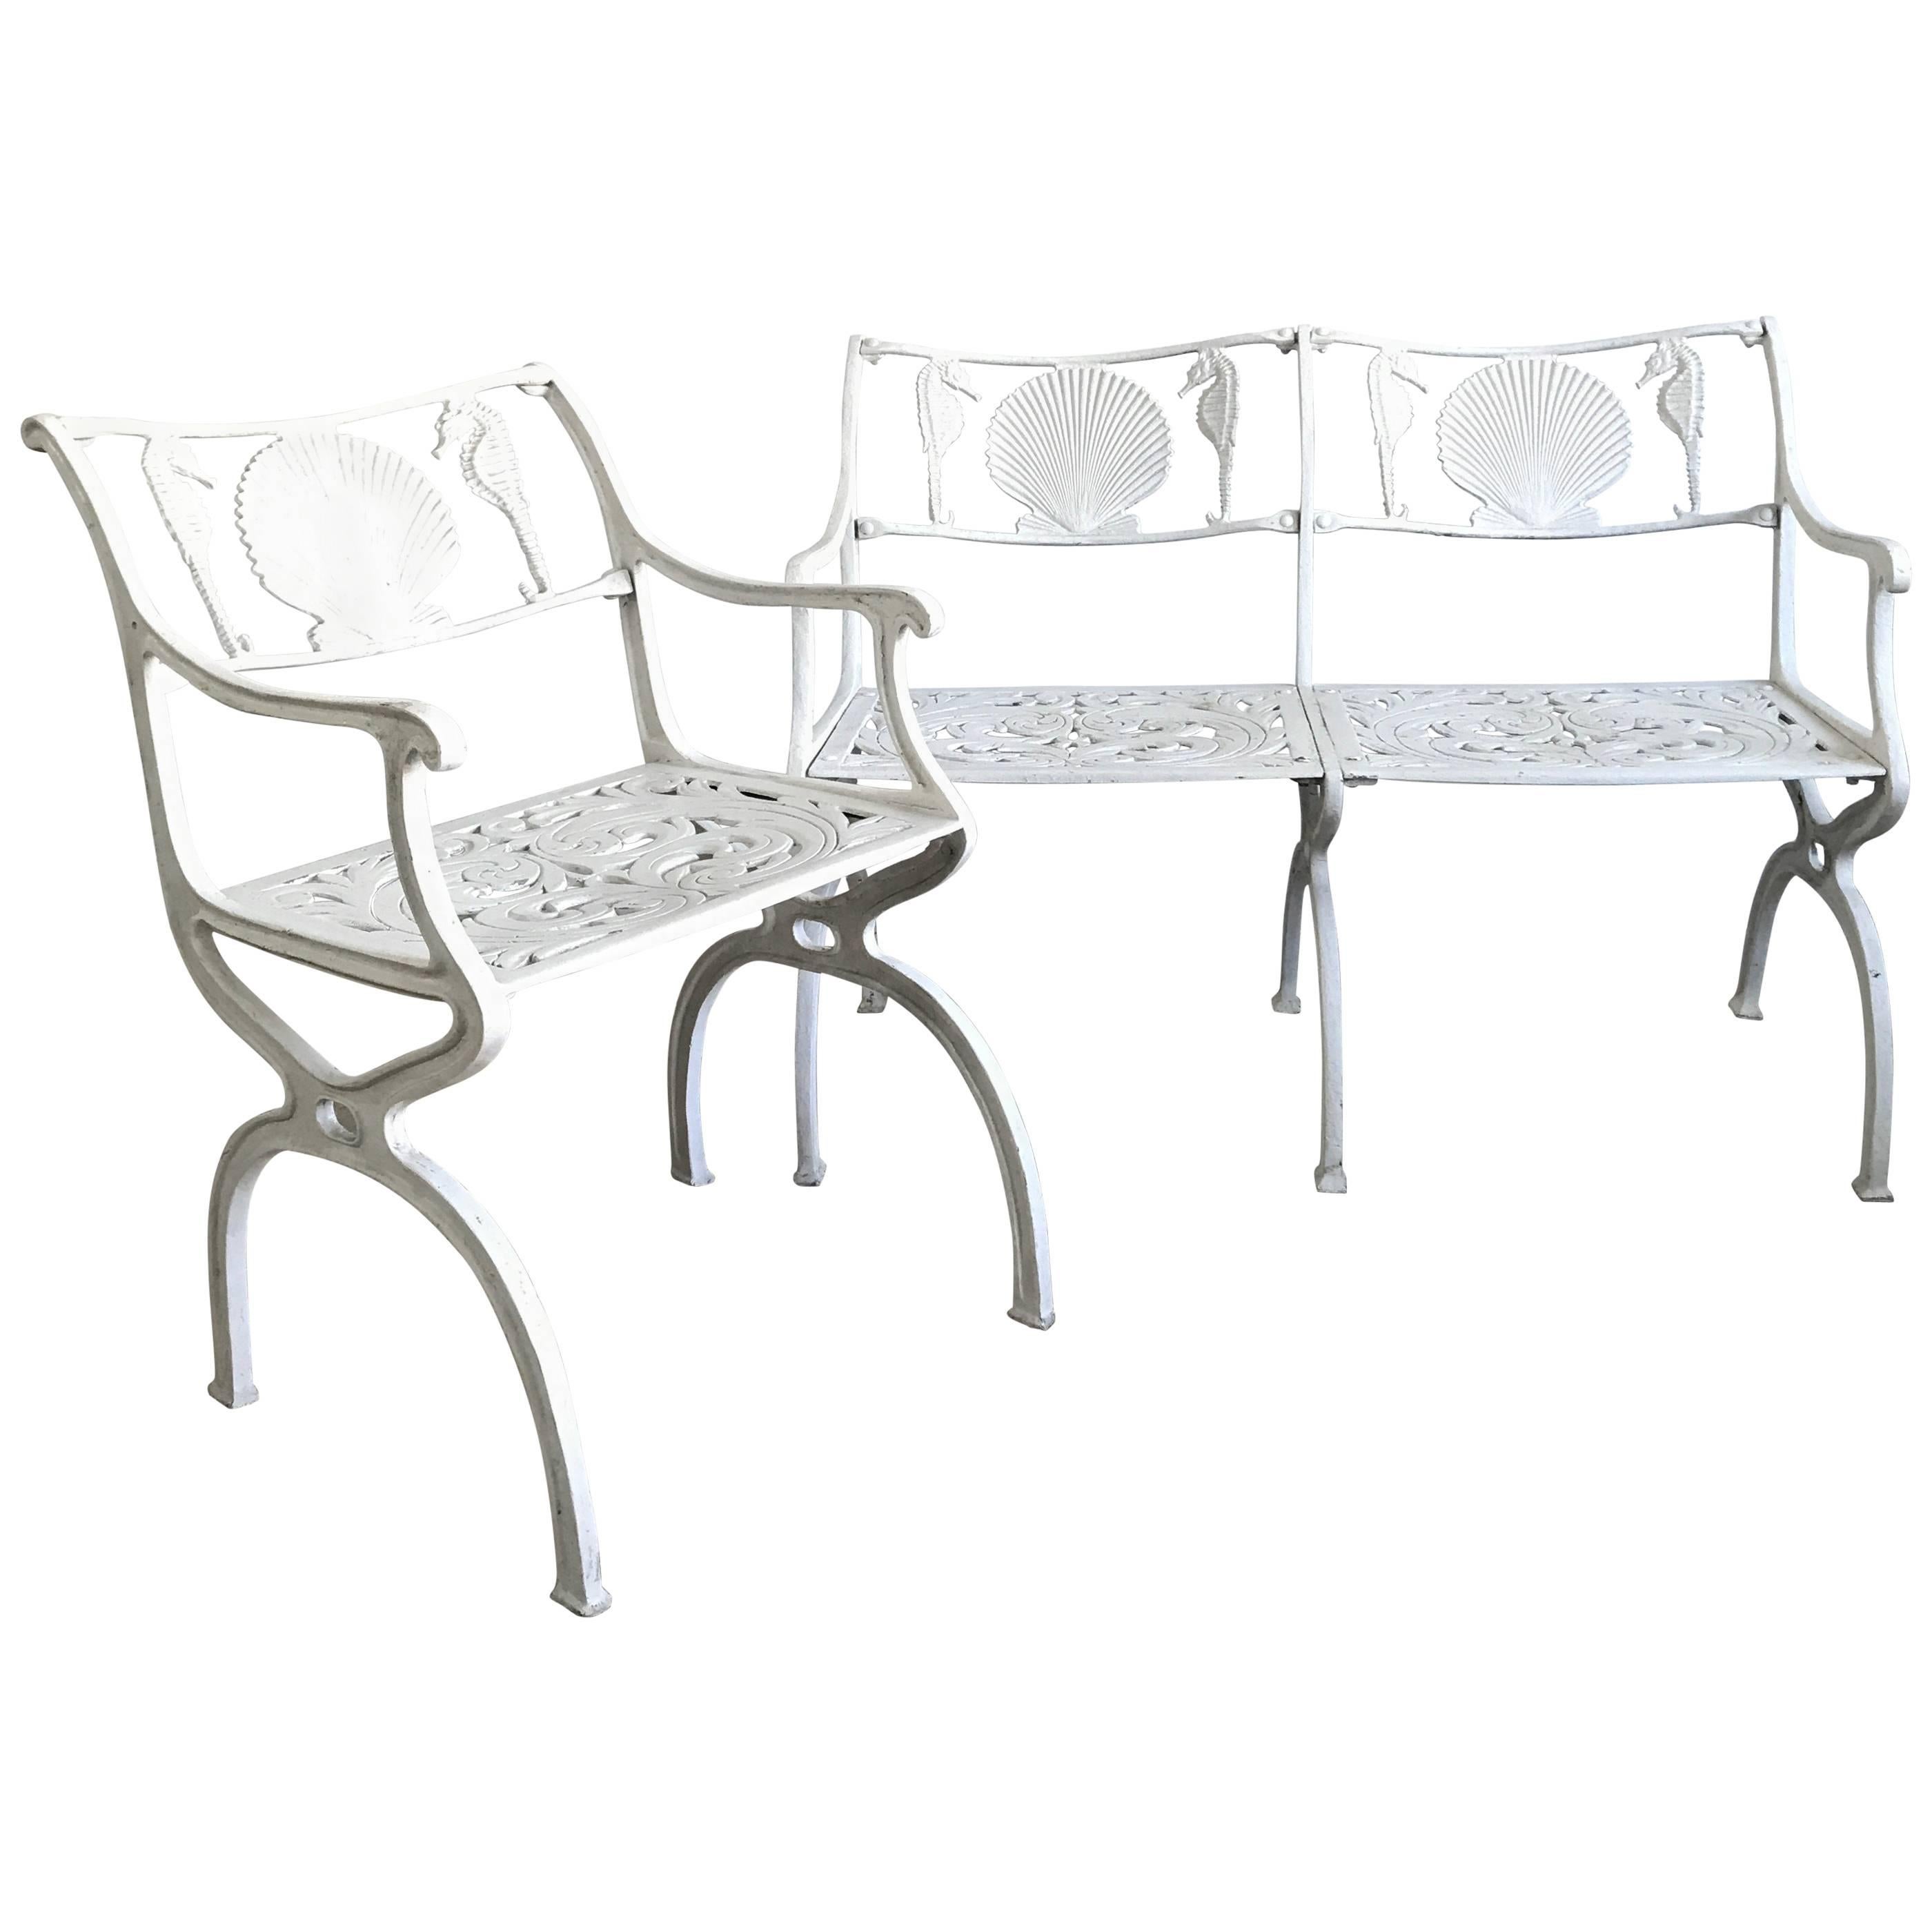 Early Suite of Molla Patio Furniture